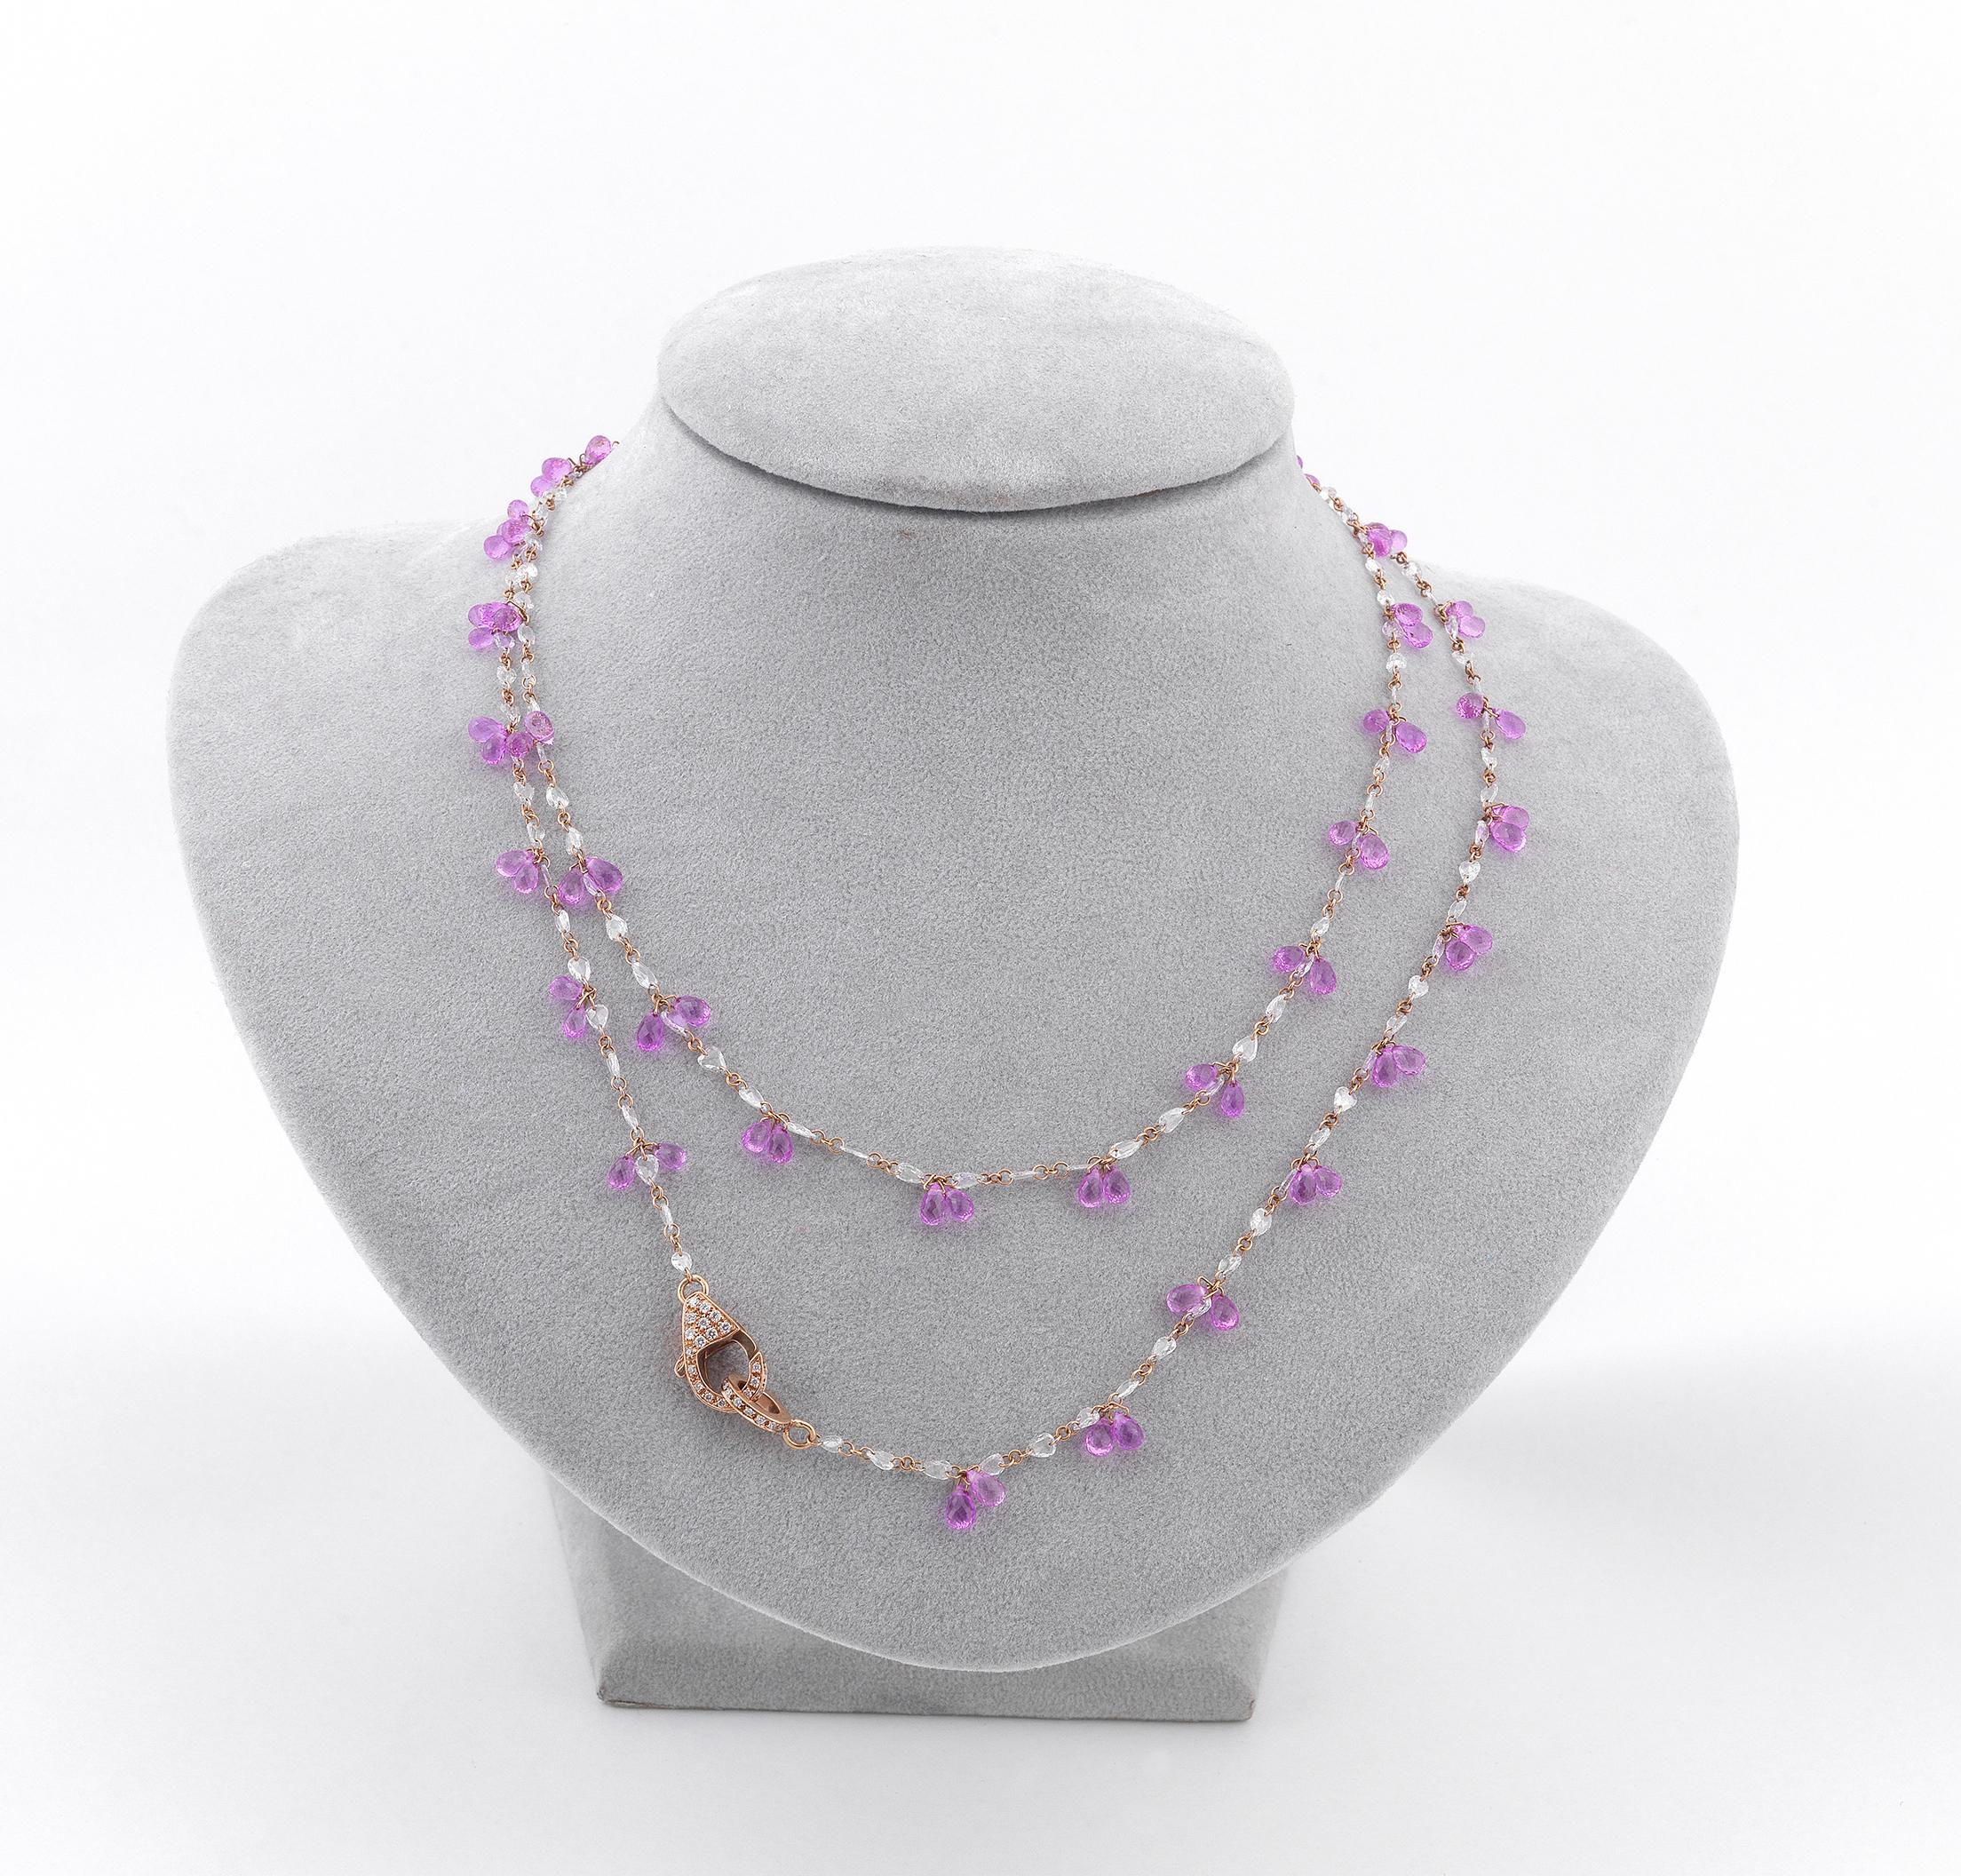 

The necklace composed of oval-shaped briolette-cut pink sapphires, each interspersed by round-shaped briolette-cut diamonds, mounted in 18K gold, sapphires weighing approximately 15.00cts total, diamonds approximately weighing 4.5cts total, length